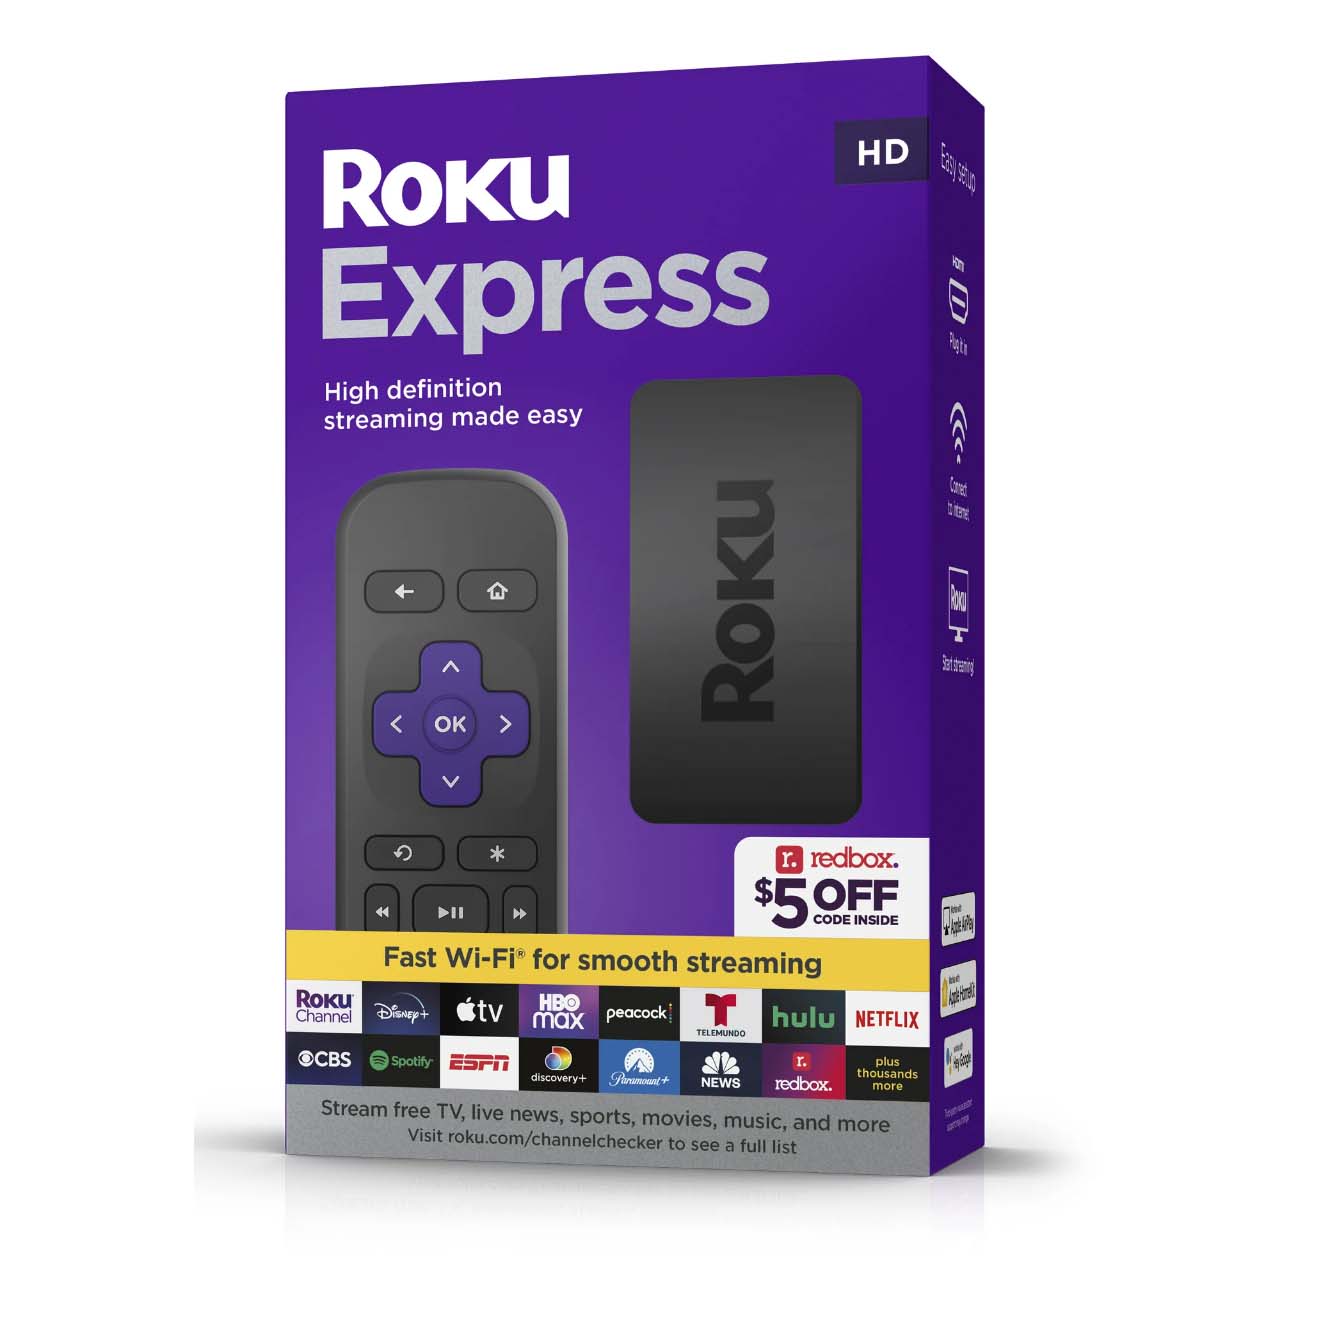 Roku Express Streaming Device in purple box packaging